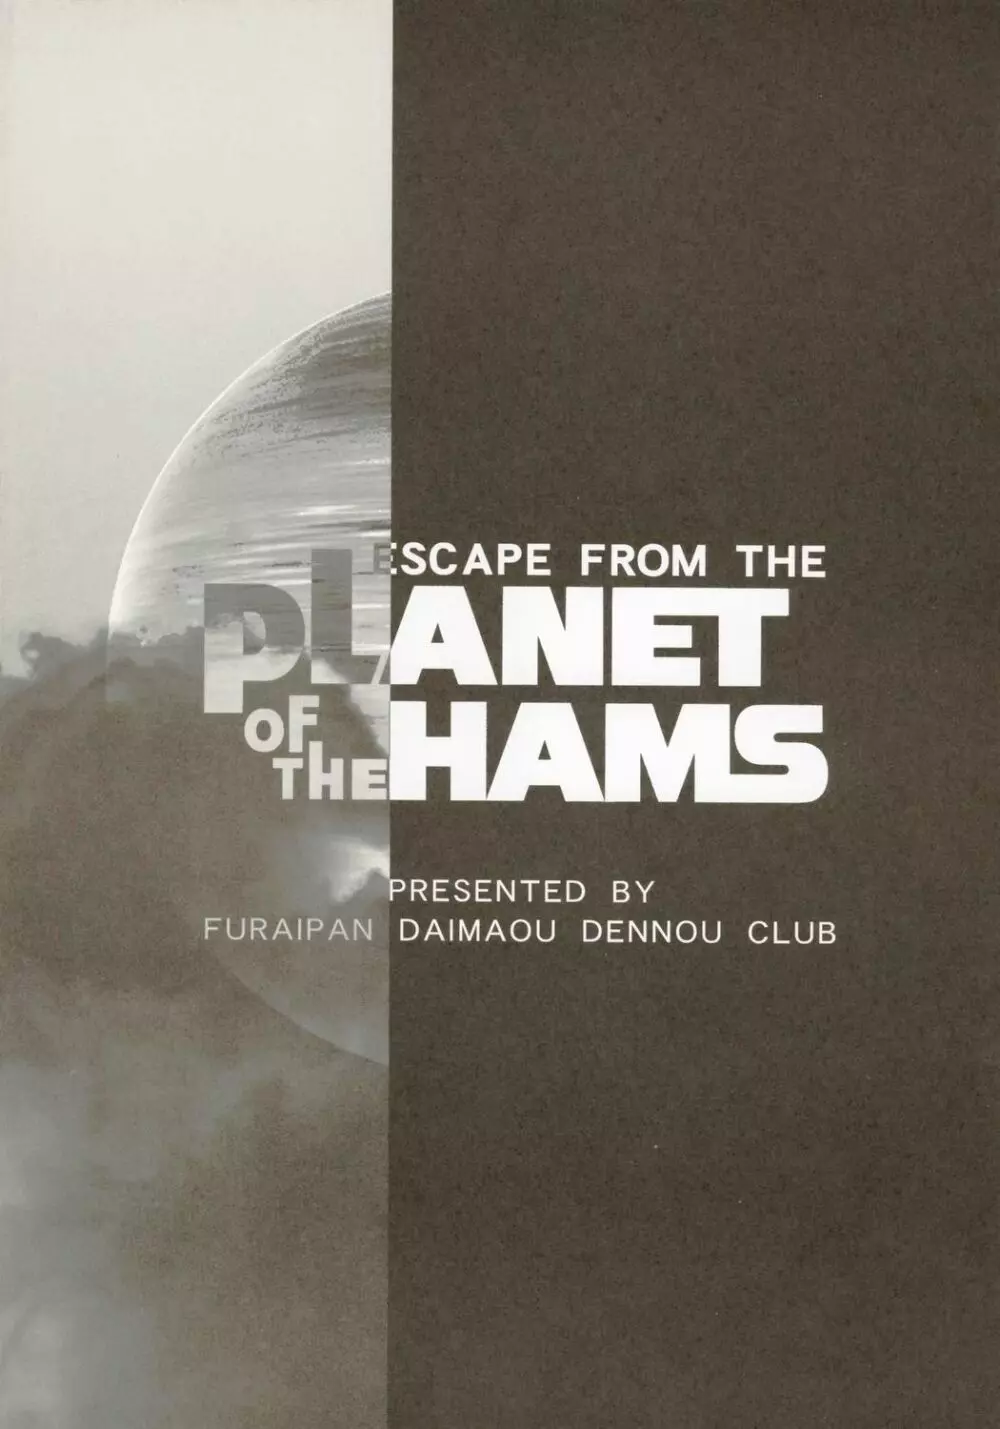 ESCAPE FROM THE PLANET OF THE HAMS 30ページ